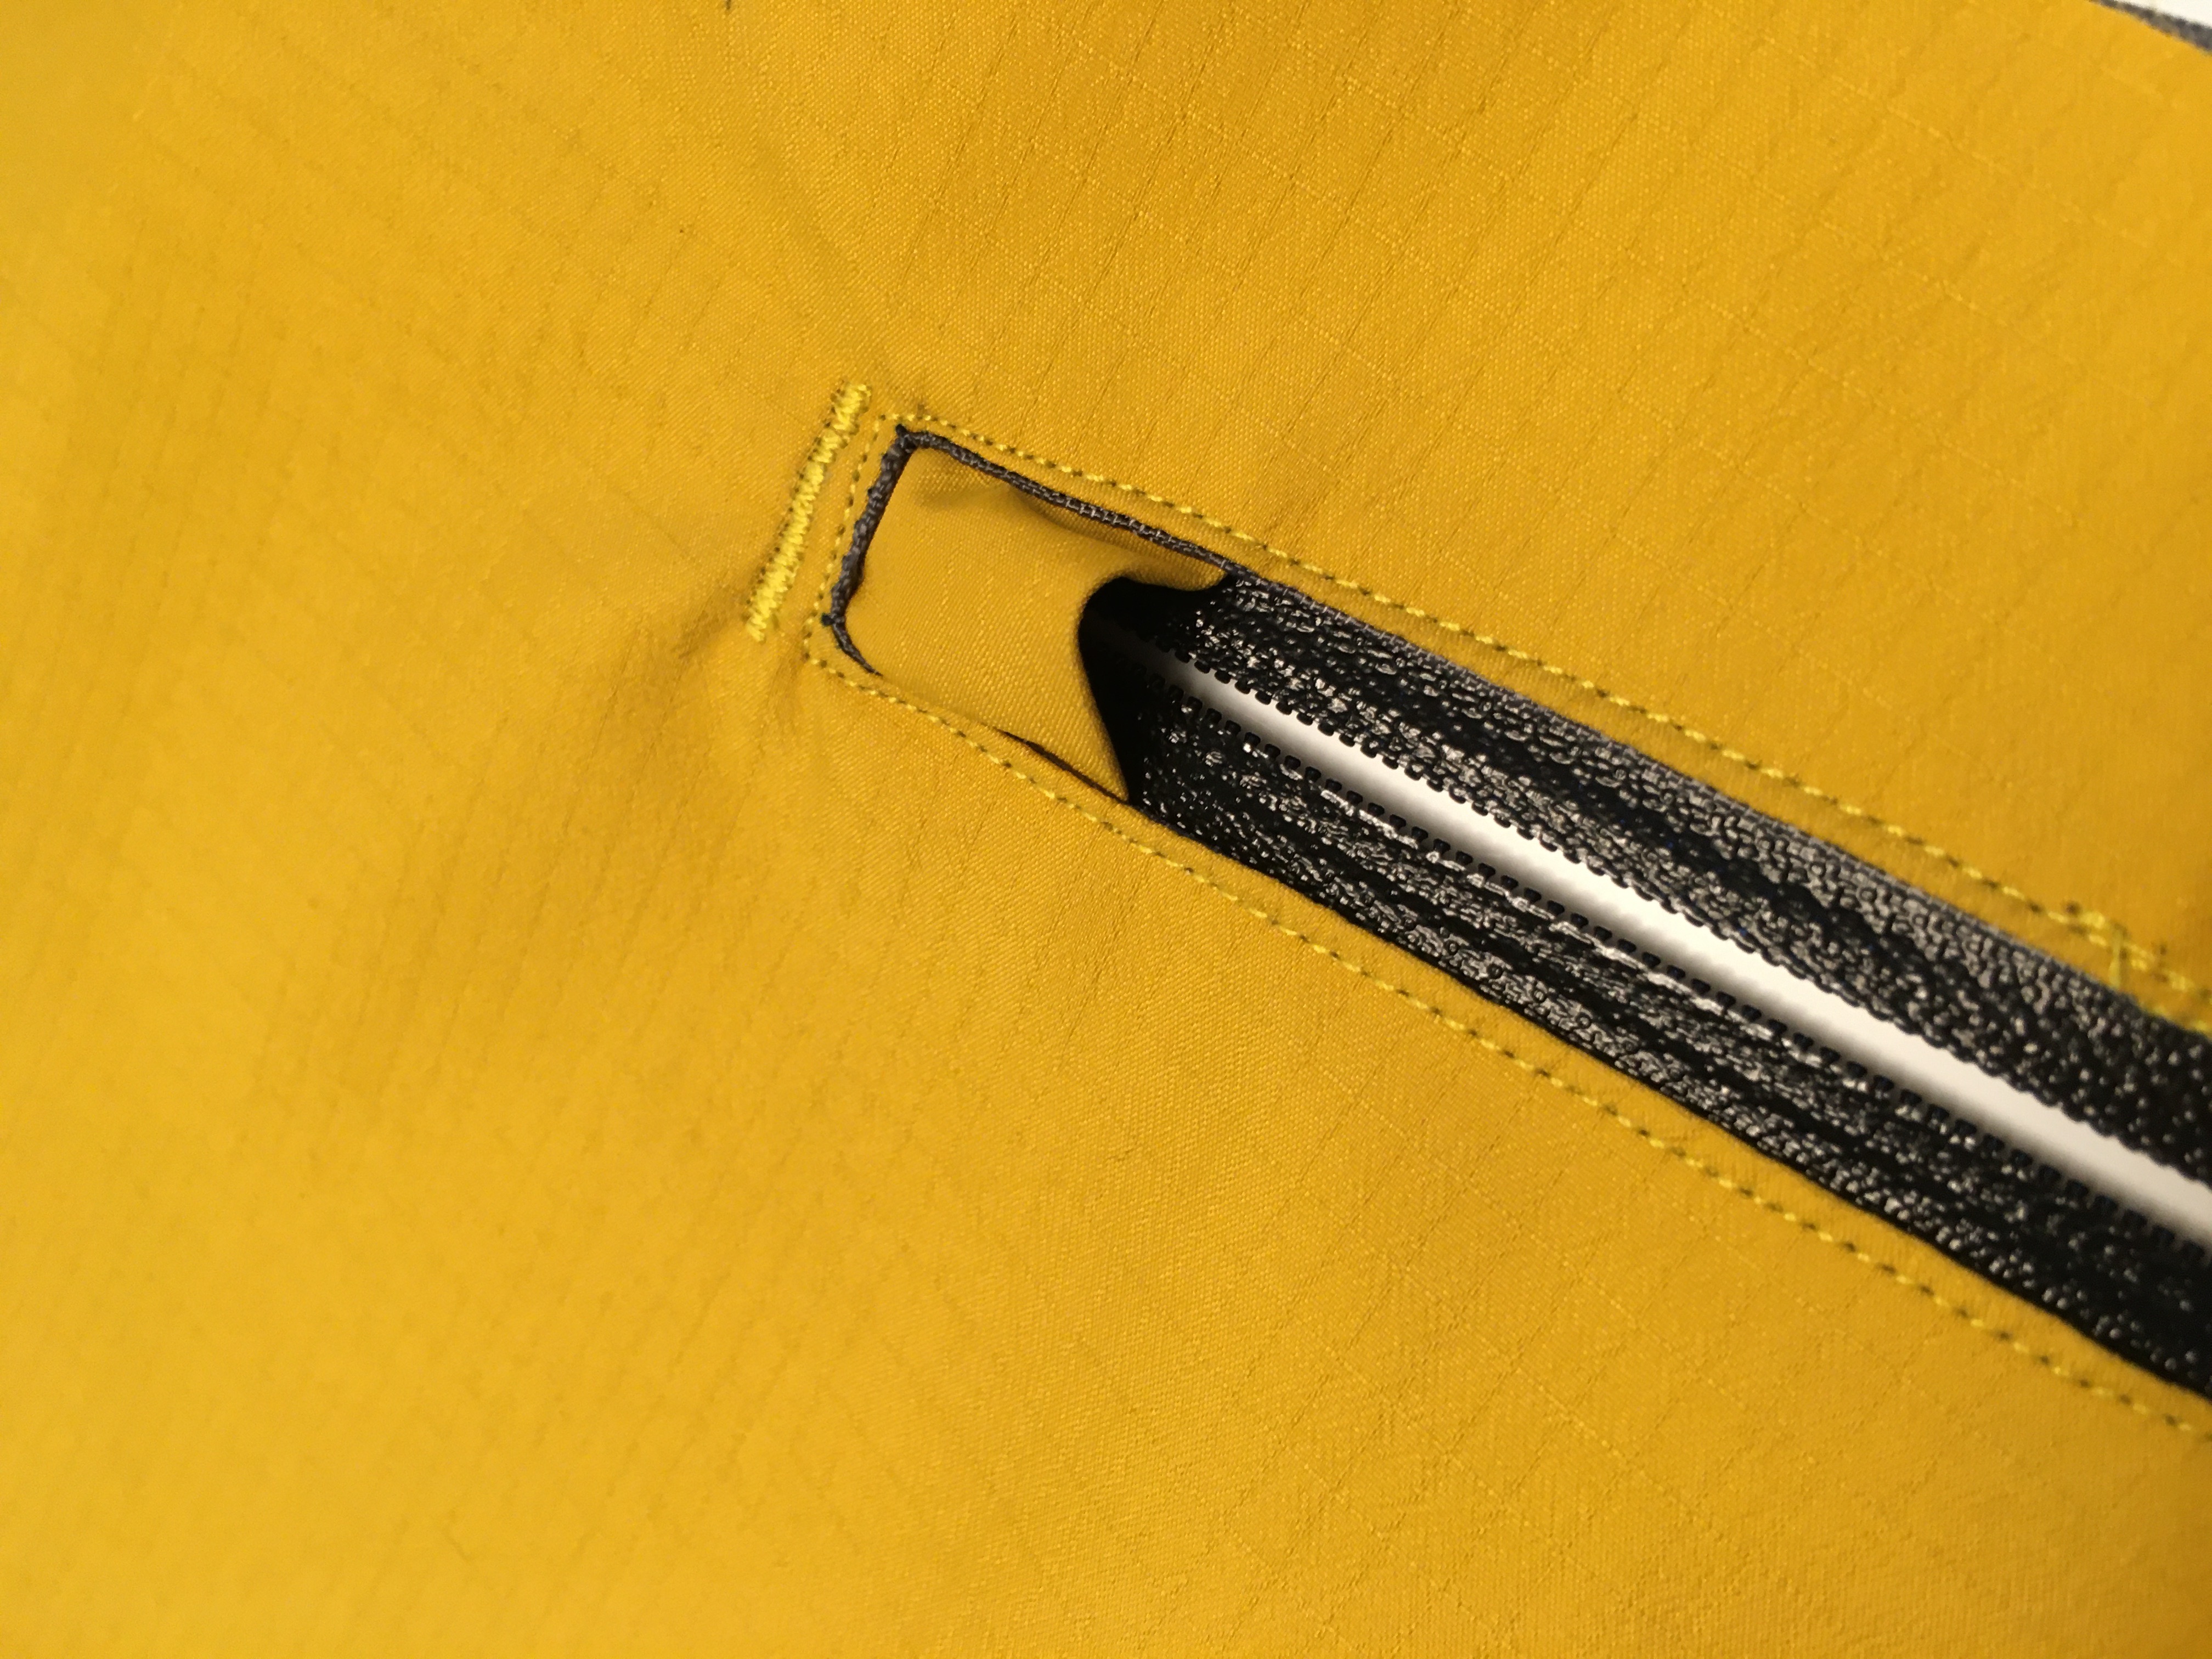 The zipper is top stitched in place with small bartacks at the top and bottoms.